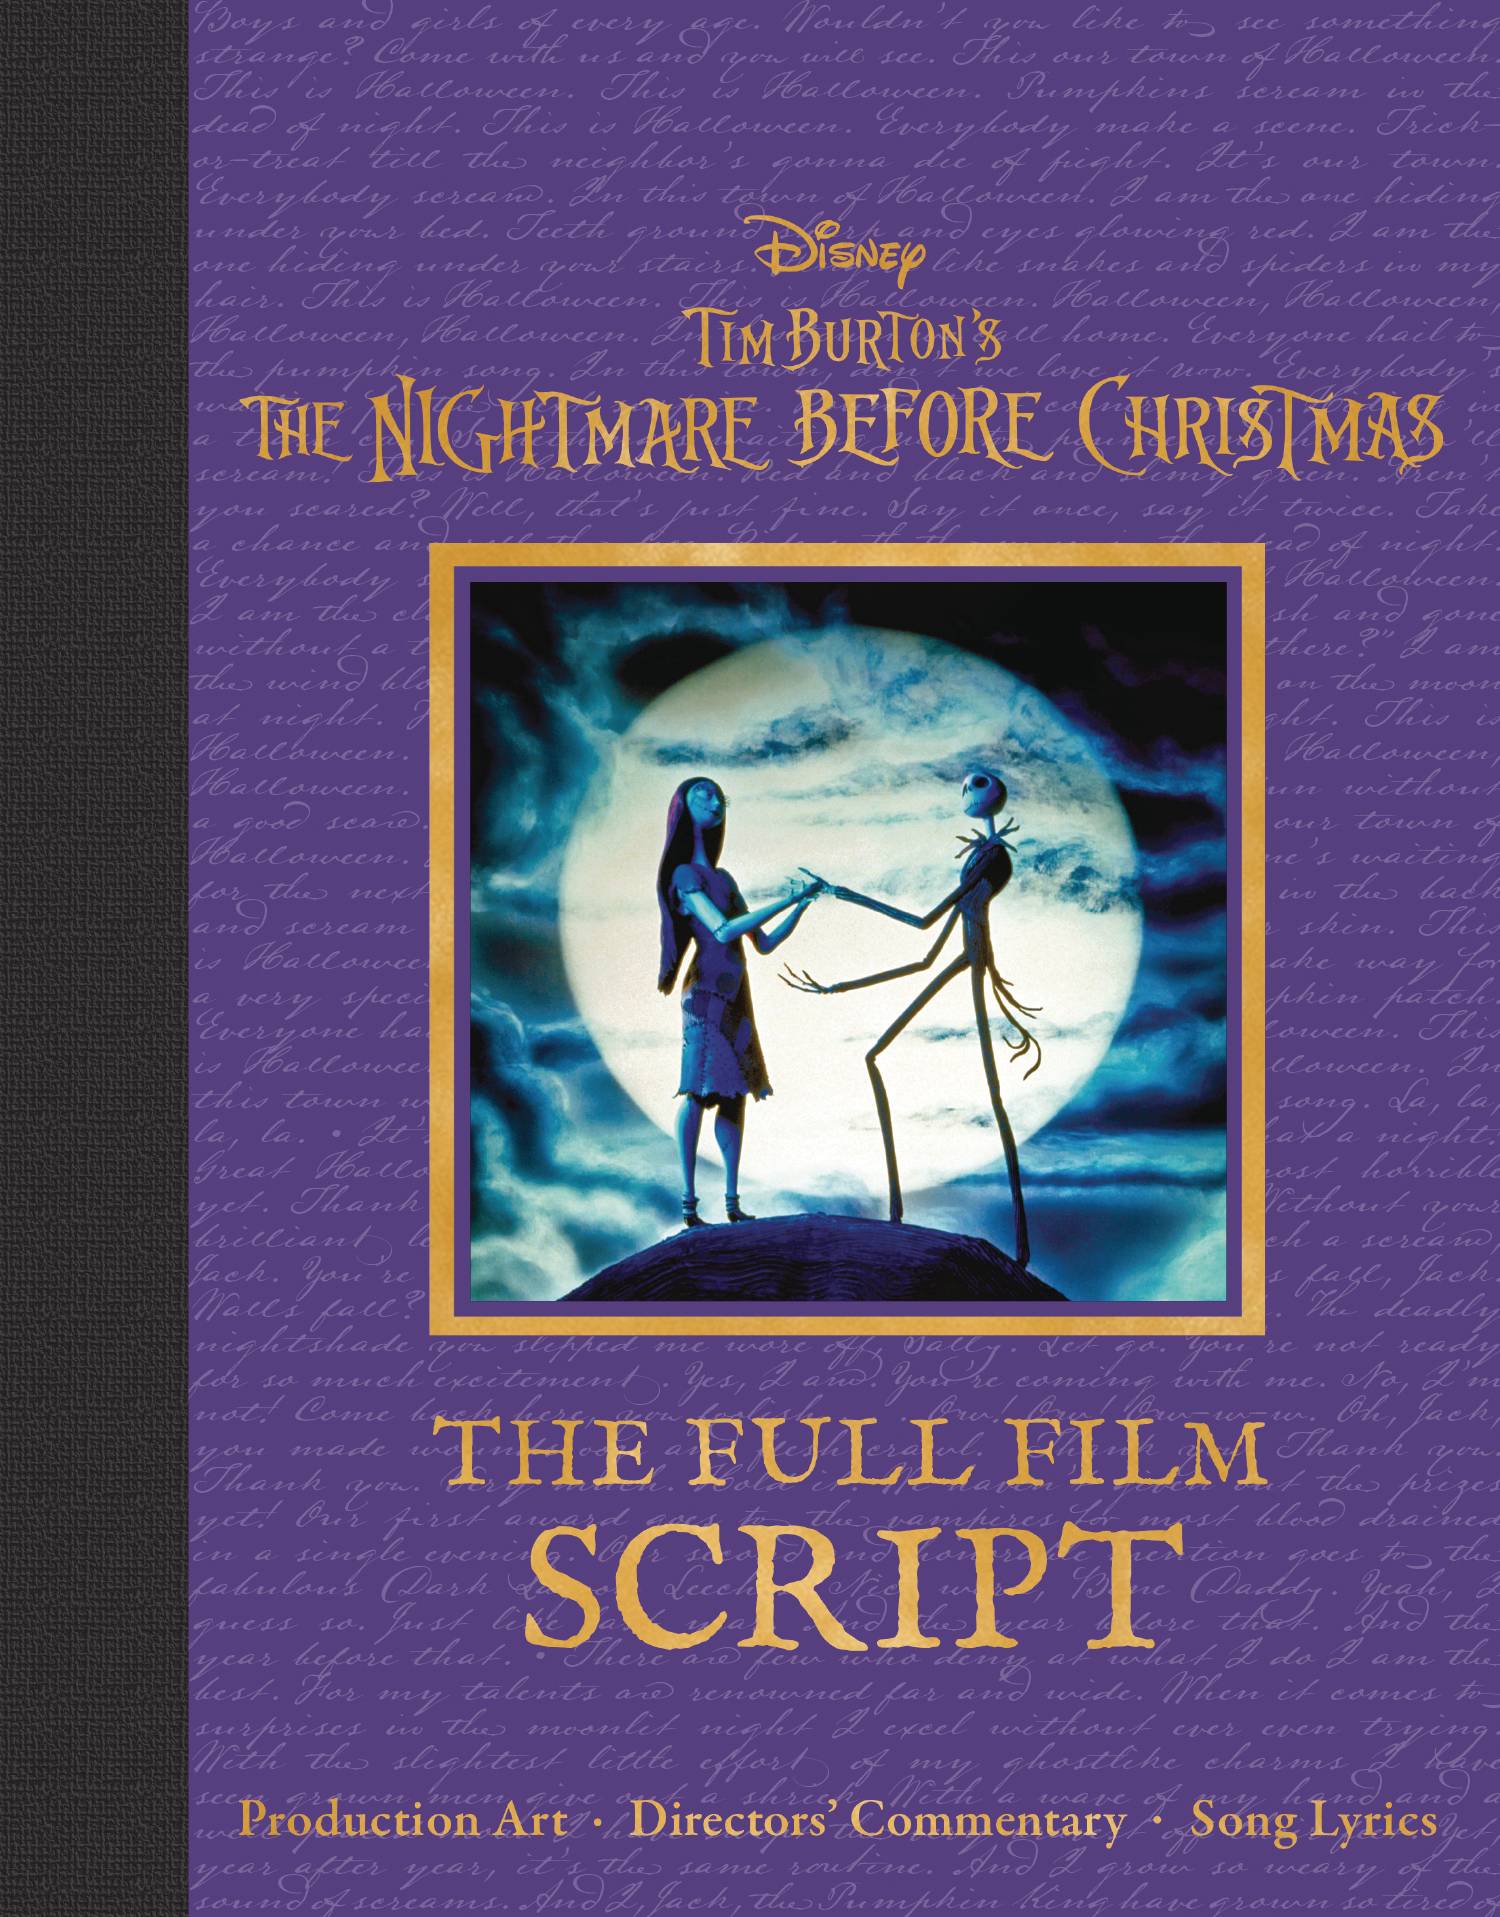 Nightmare Before Christmas Making-Of New Book Exclusive Preview